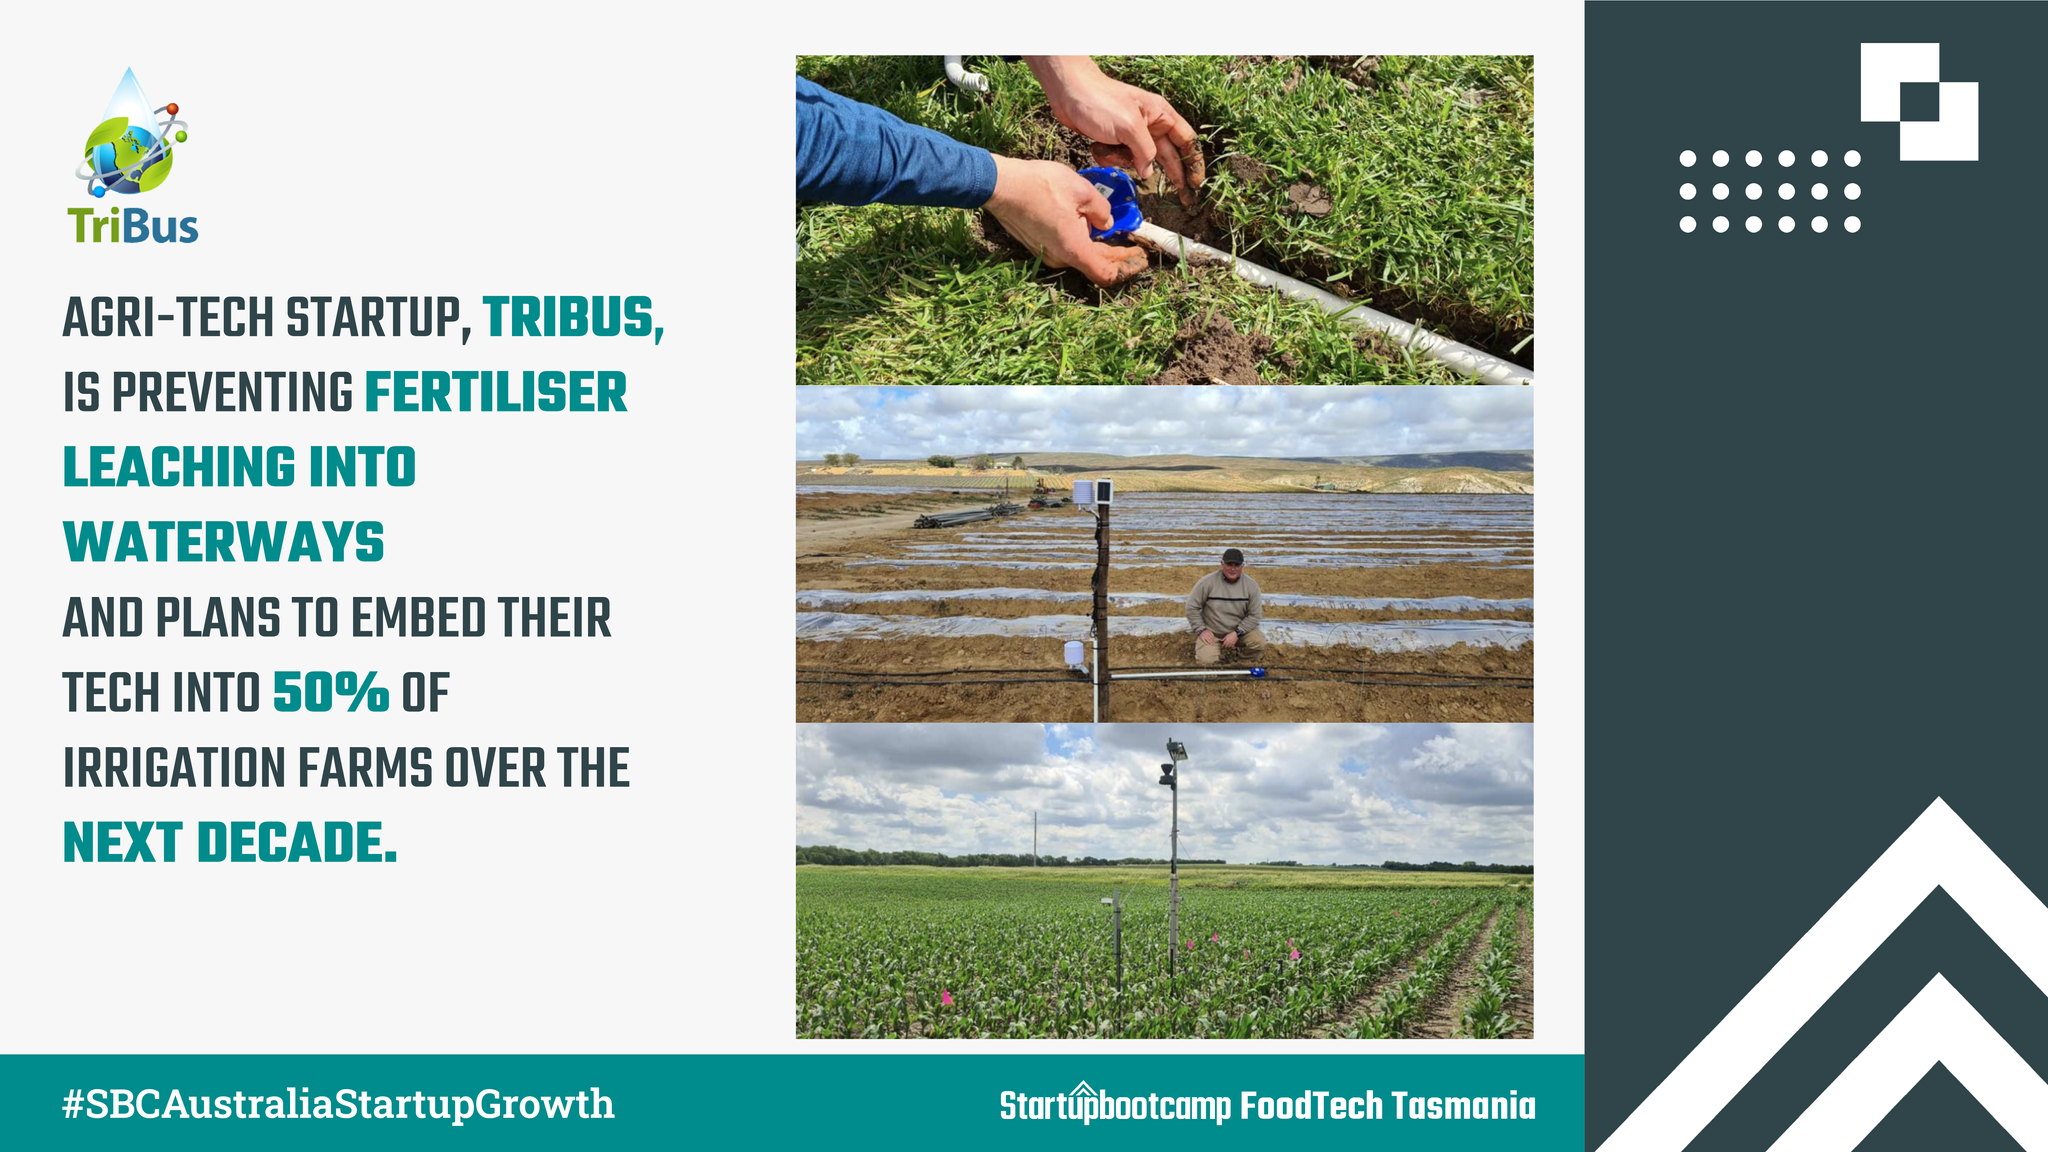 TriBus, the Startup Making Every Drop Count in Sustainable Farming